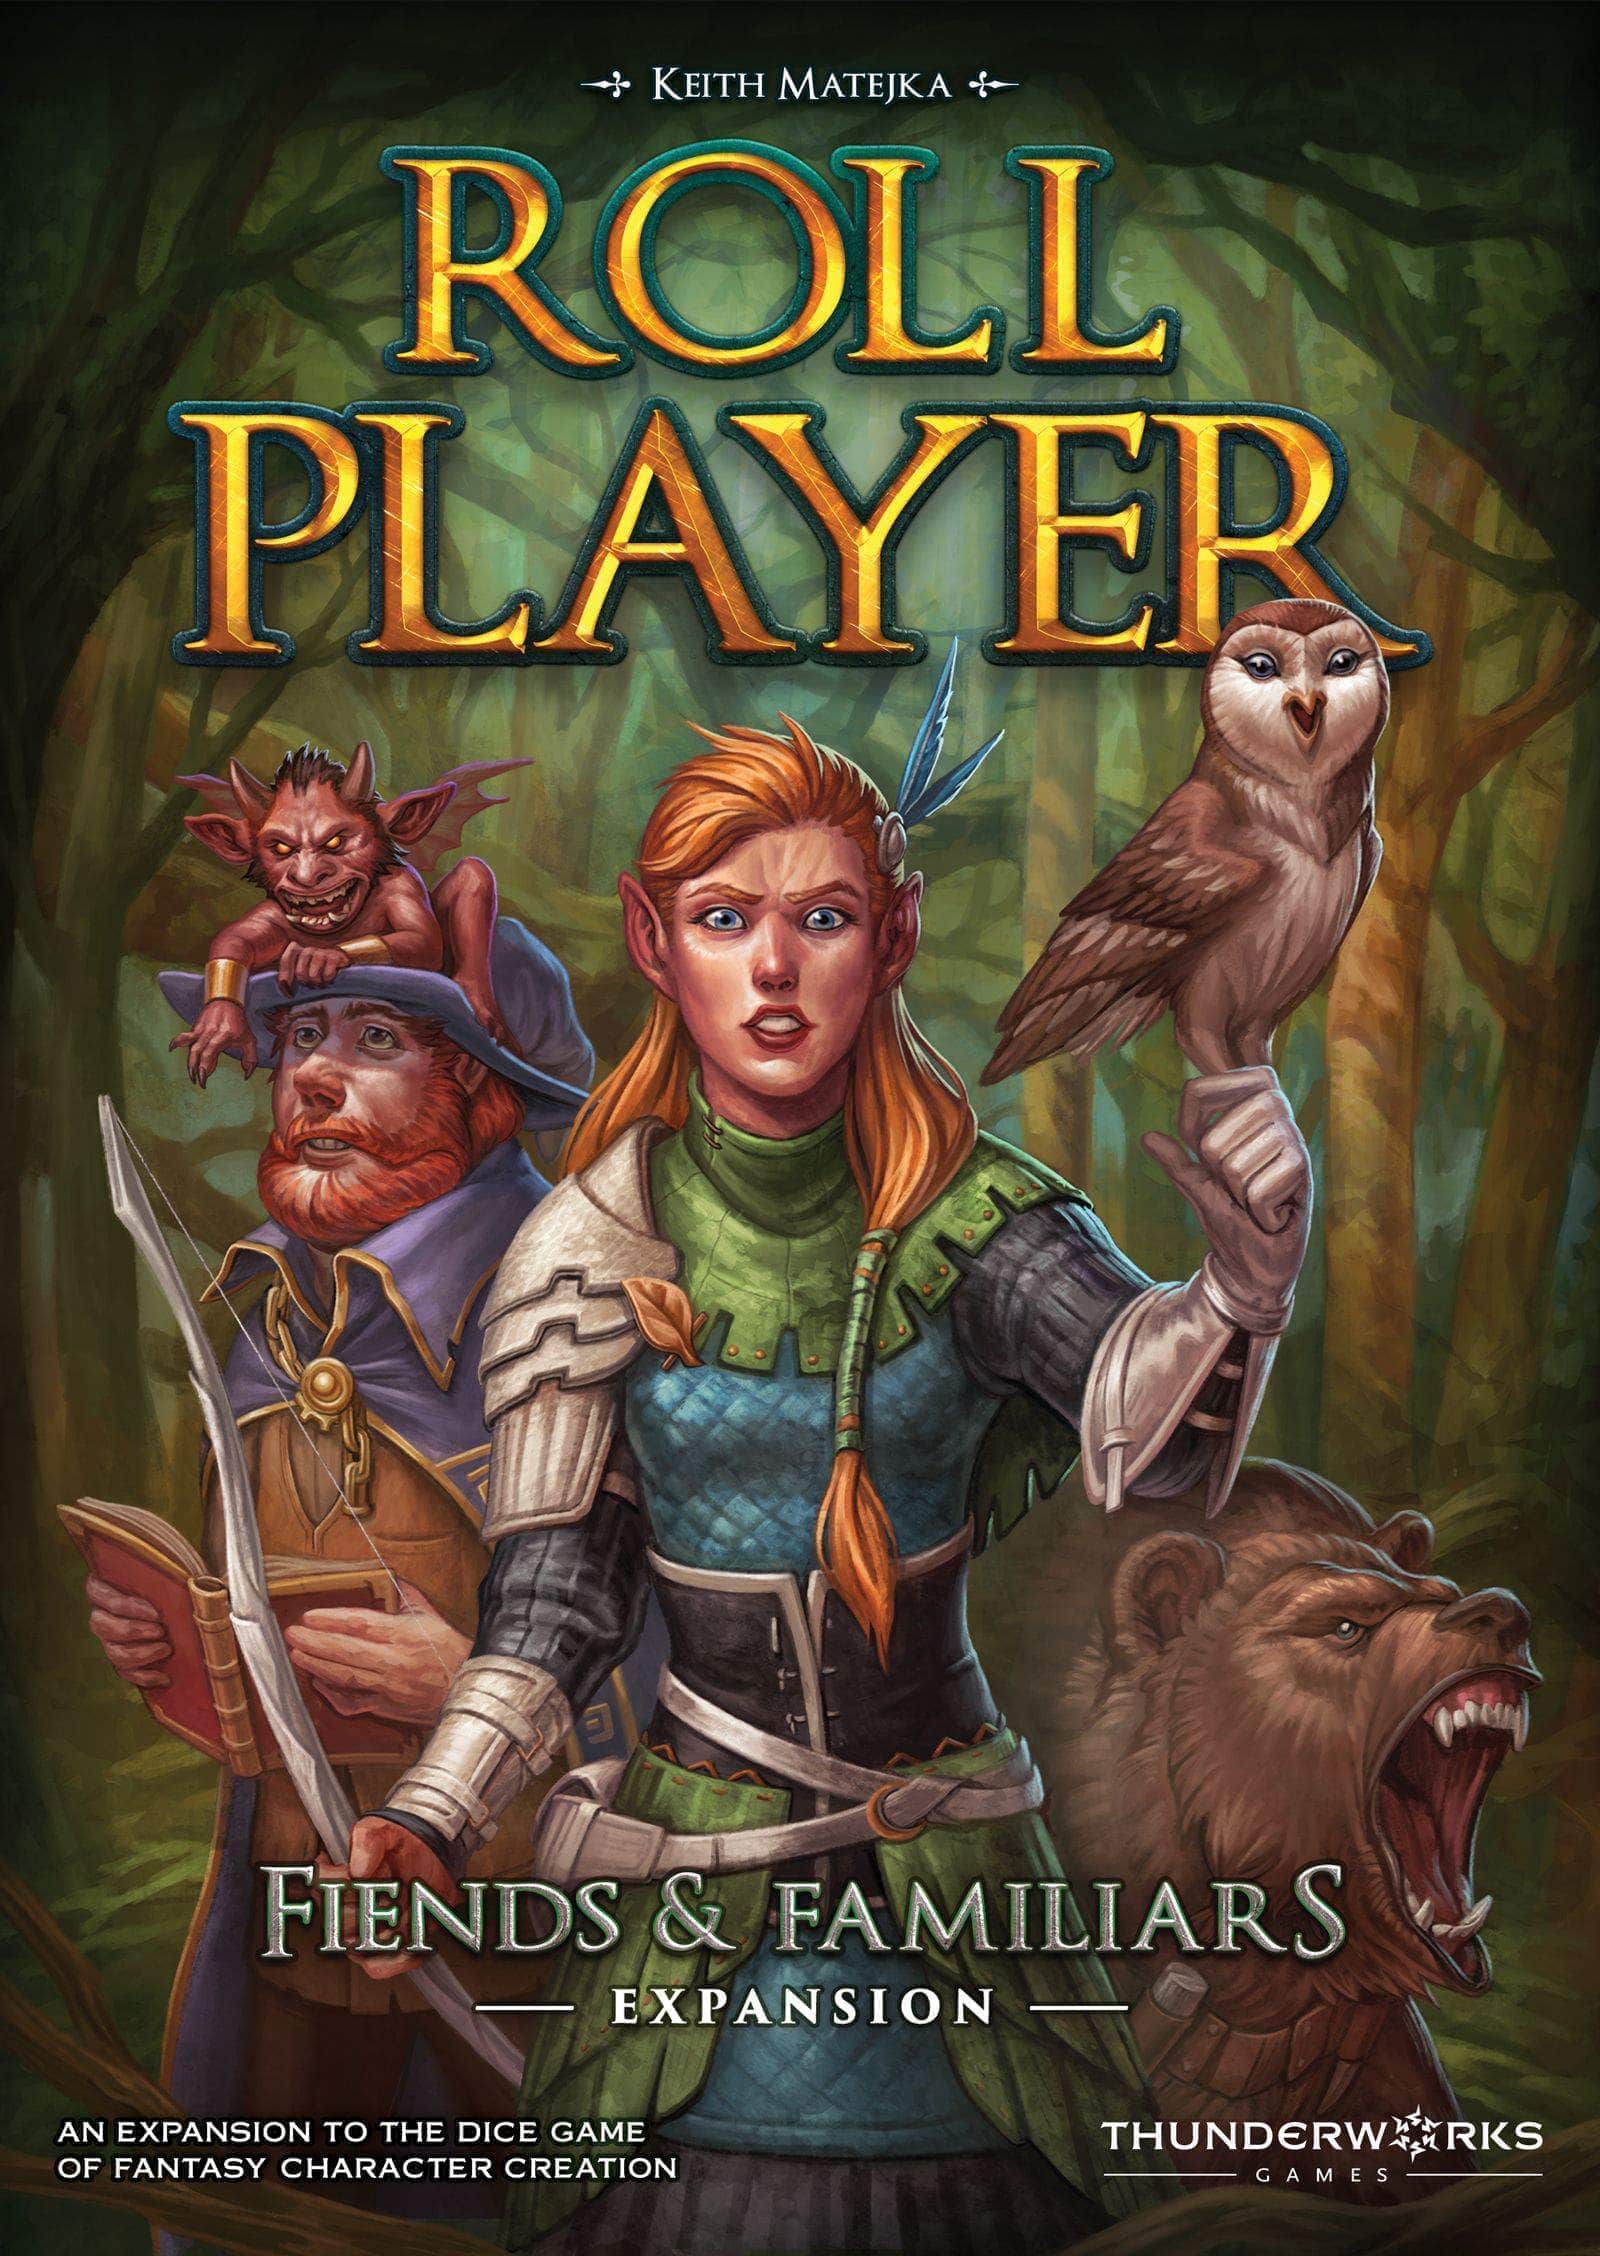 Roll Player: Fiends & Familiars (Retail Edition) Retail Board Game Expansion Thunderworks Games KS000948I